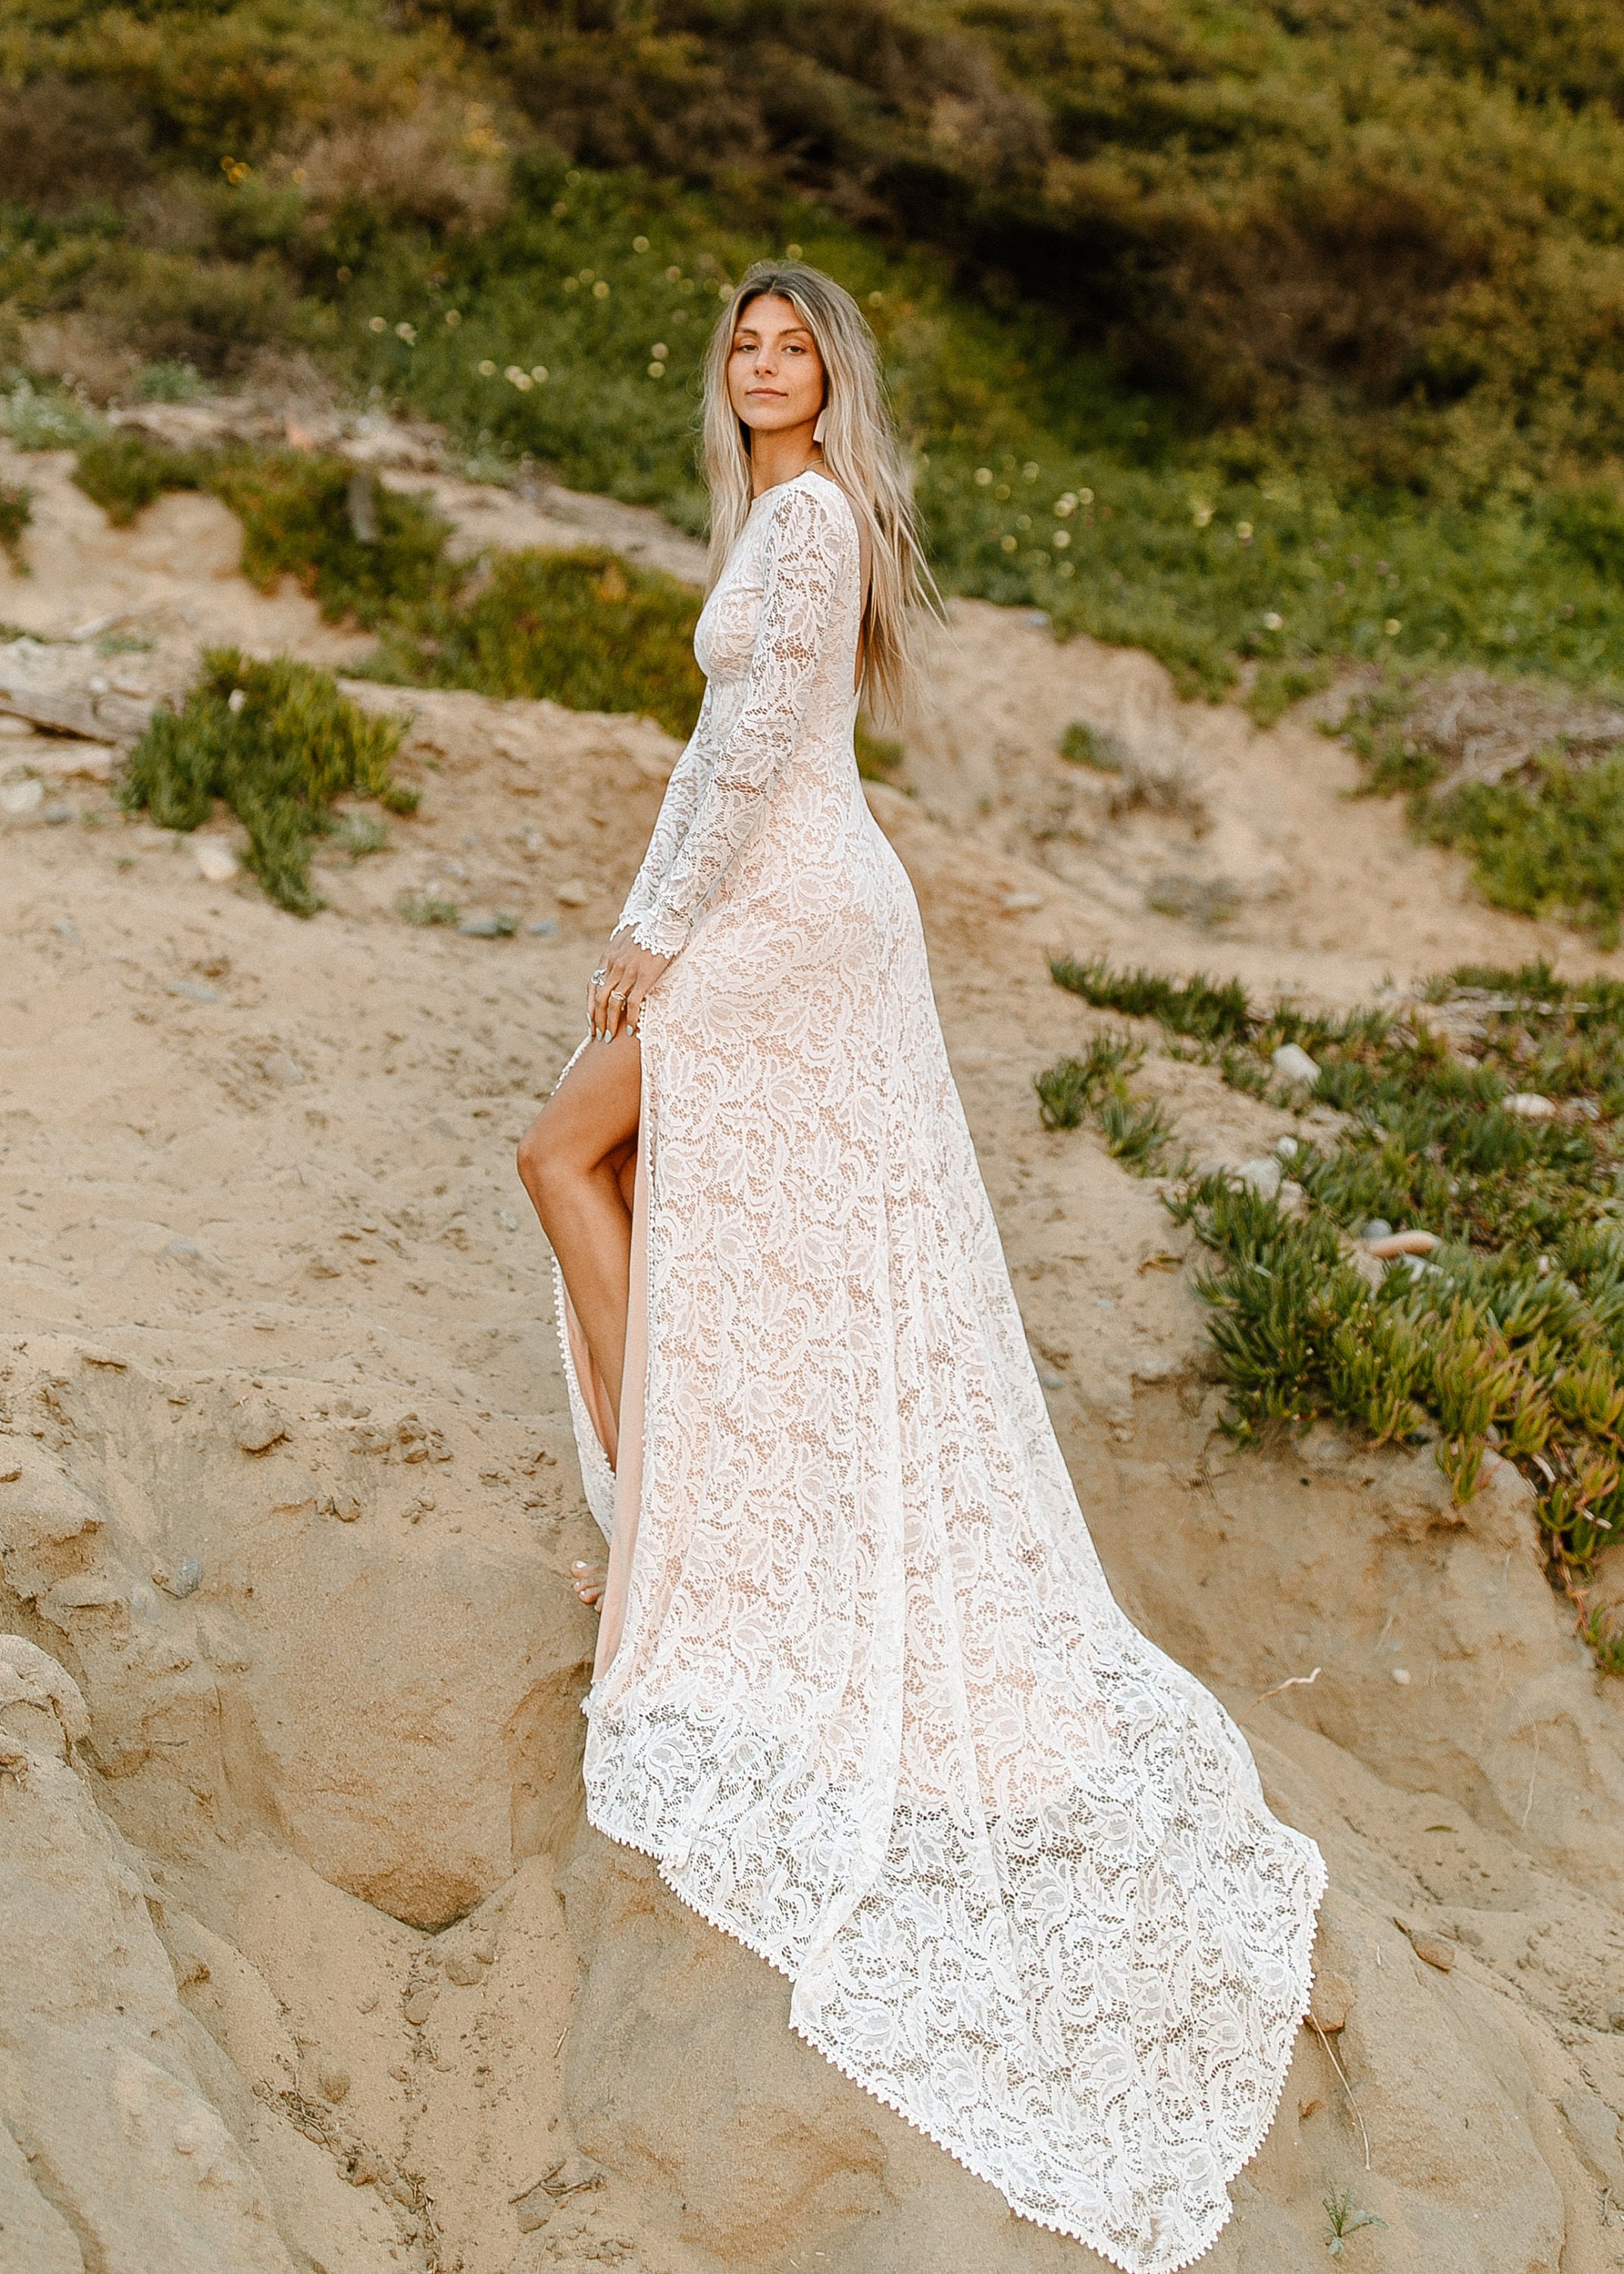 Long Sleeve Wedding Dress With Open Back, Bohemian Lace Wedding Dress,  A-line Boatneck Bridal Dress, Ethically Made Gown the Heila Dress -   Canada